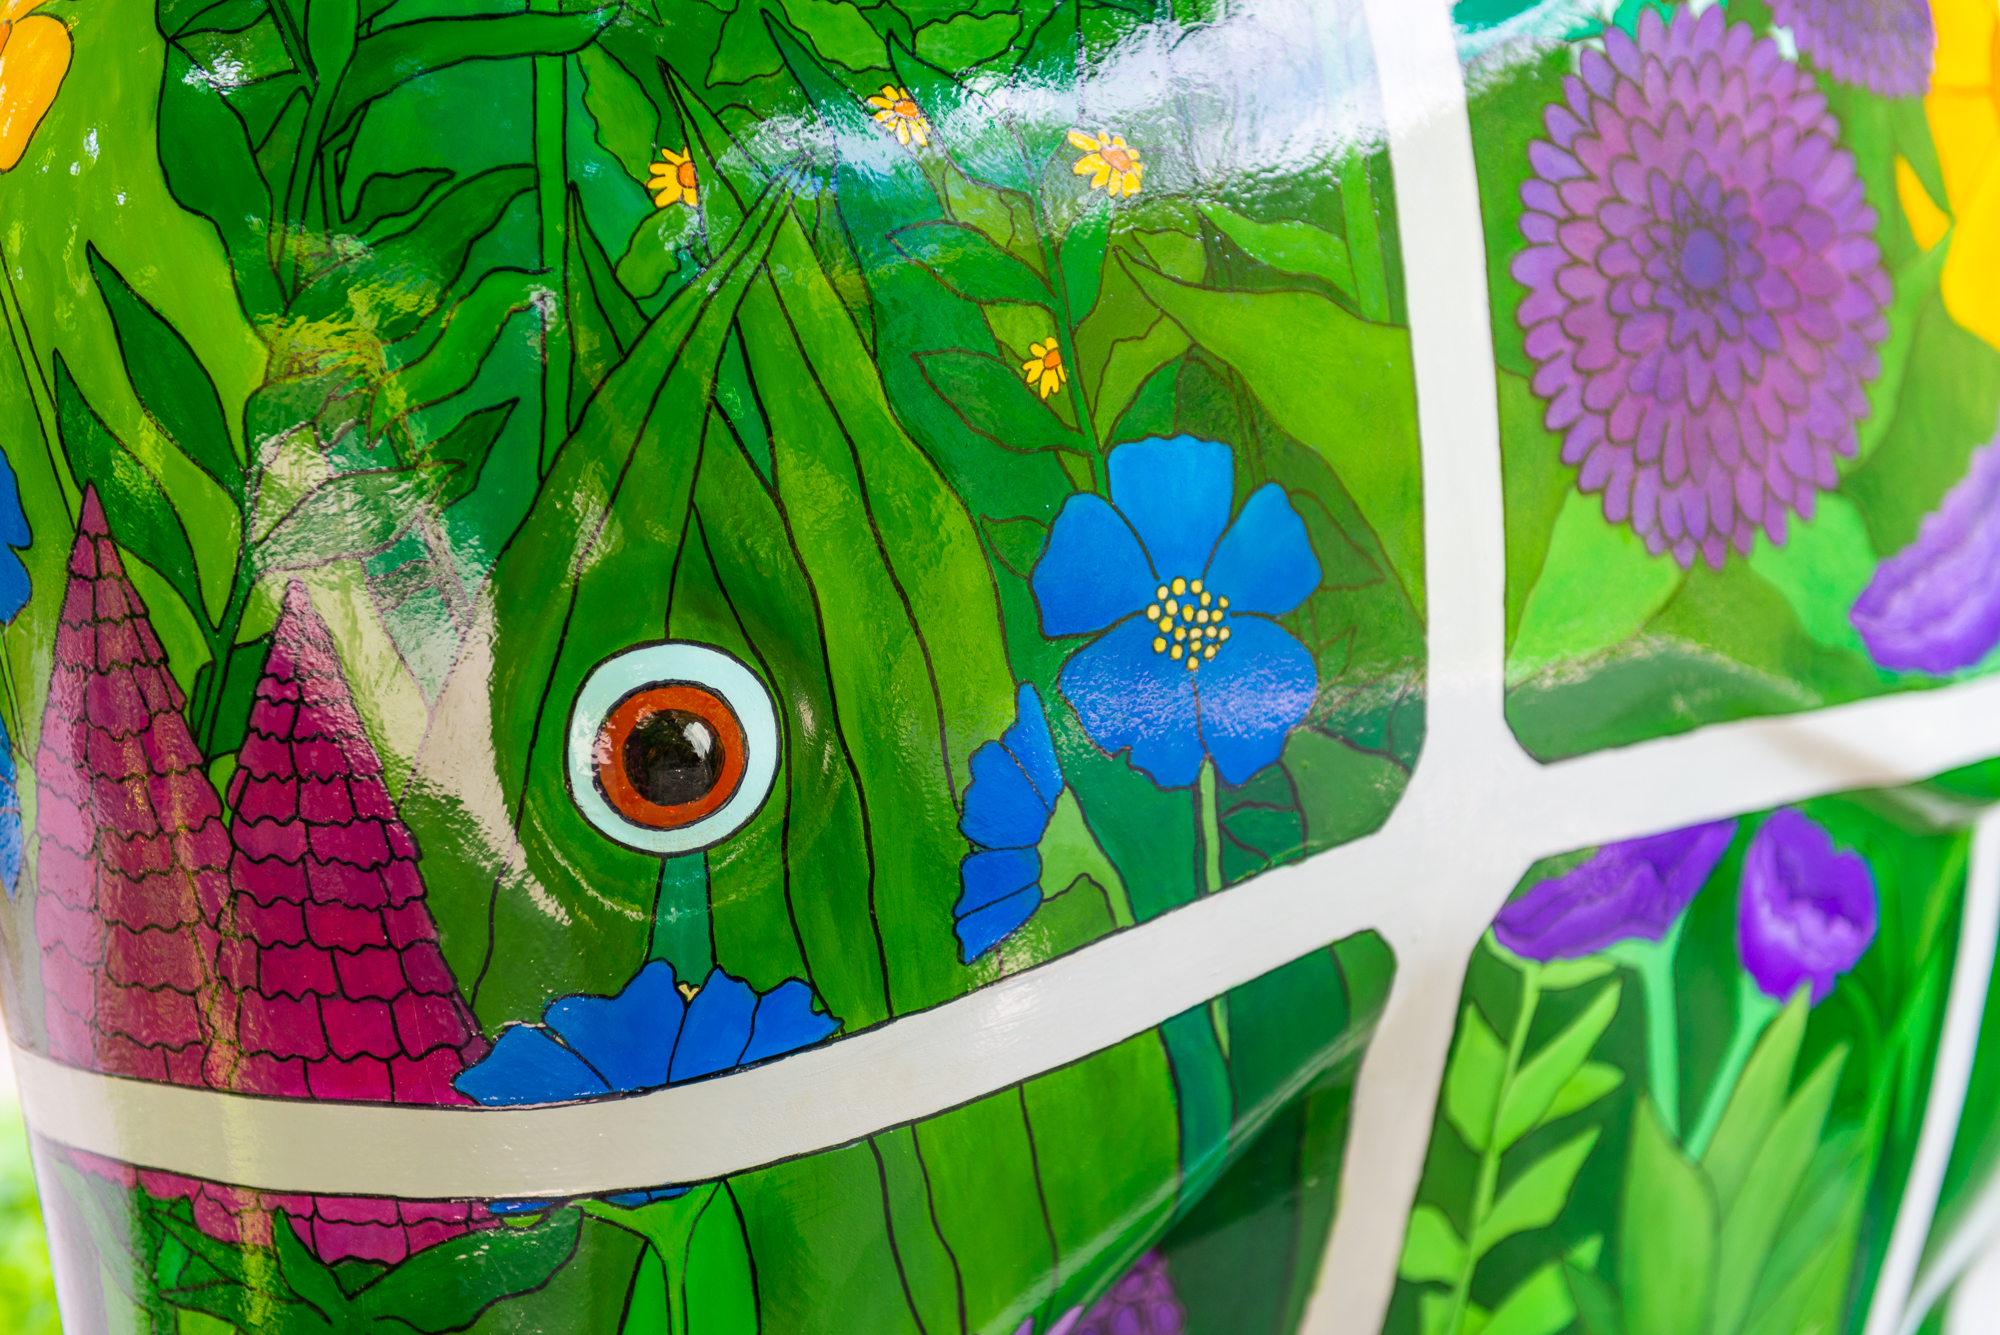 'Blooming Greenhouse' by Leah Hayler. Sponsored by St Luke's Hospice Plymouth - Image 11 of 13